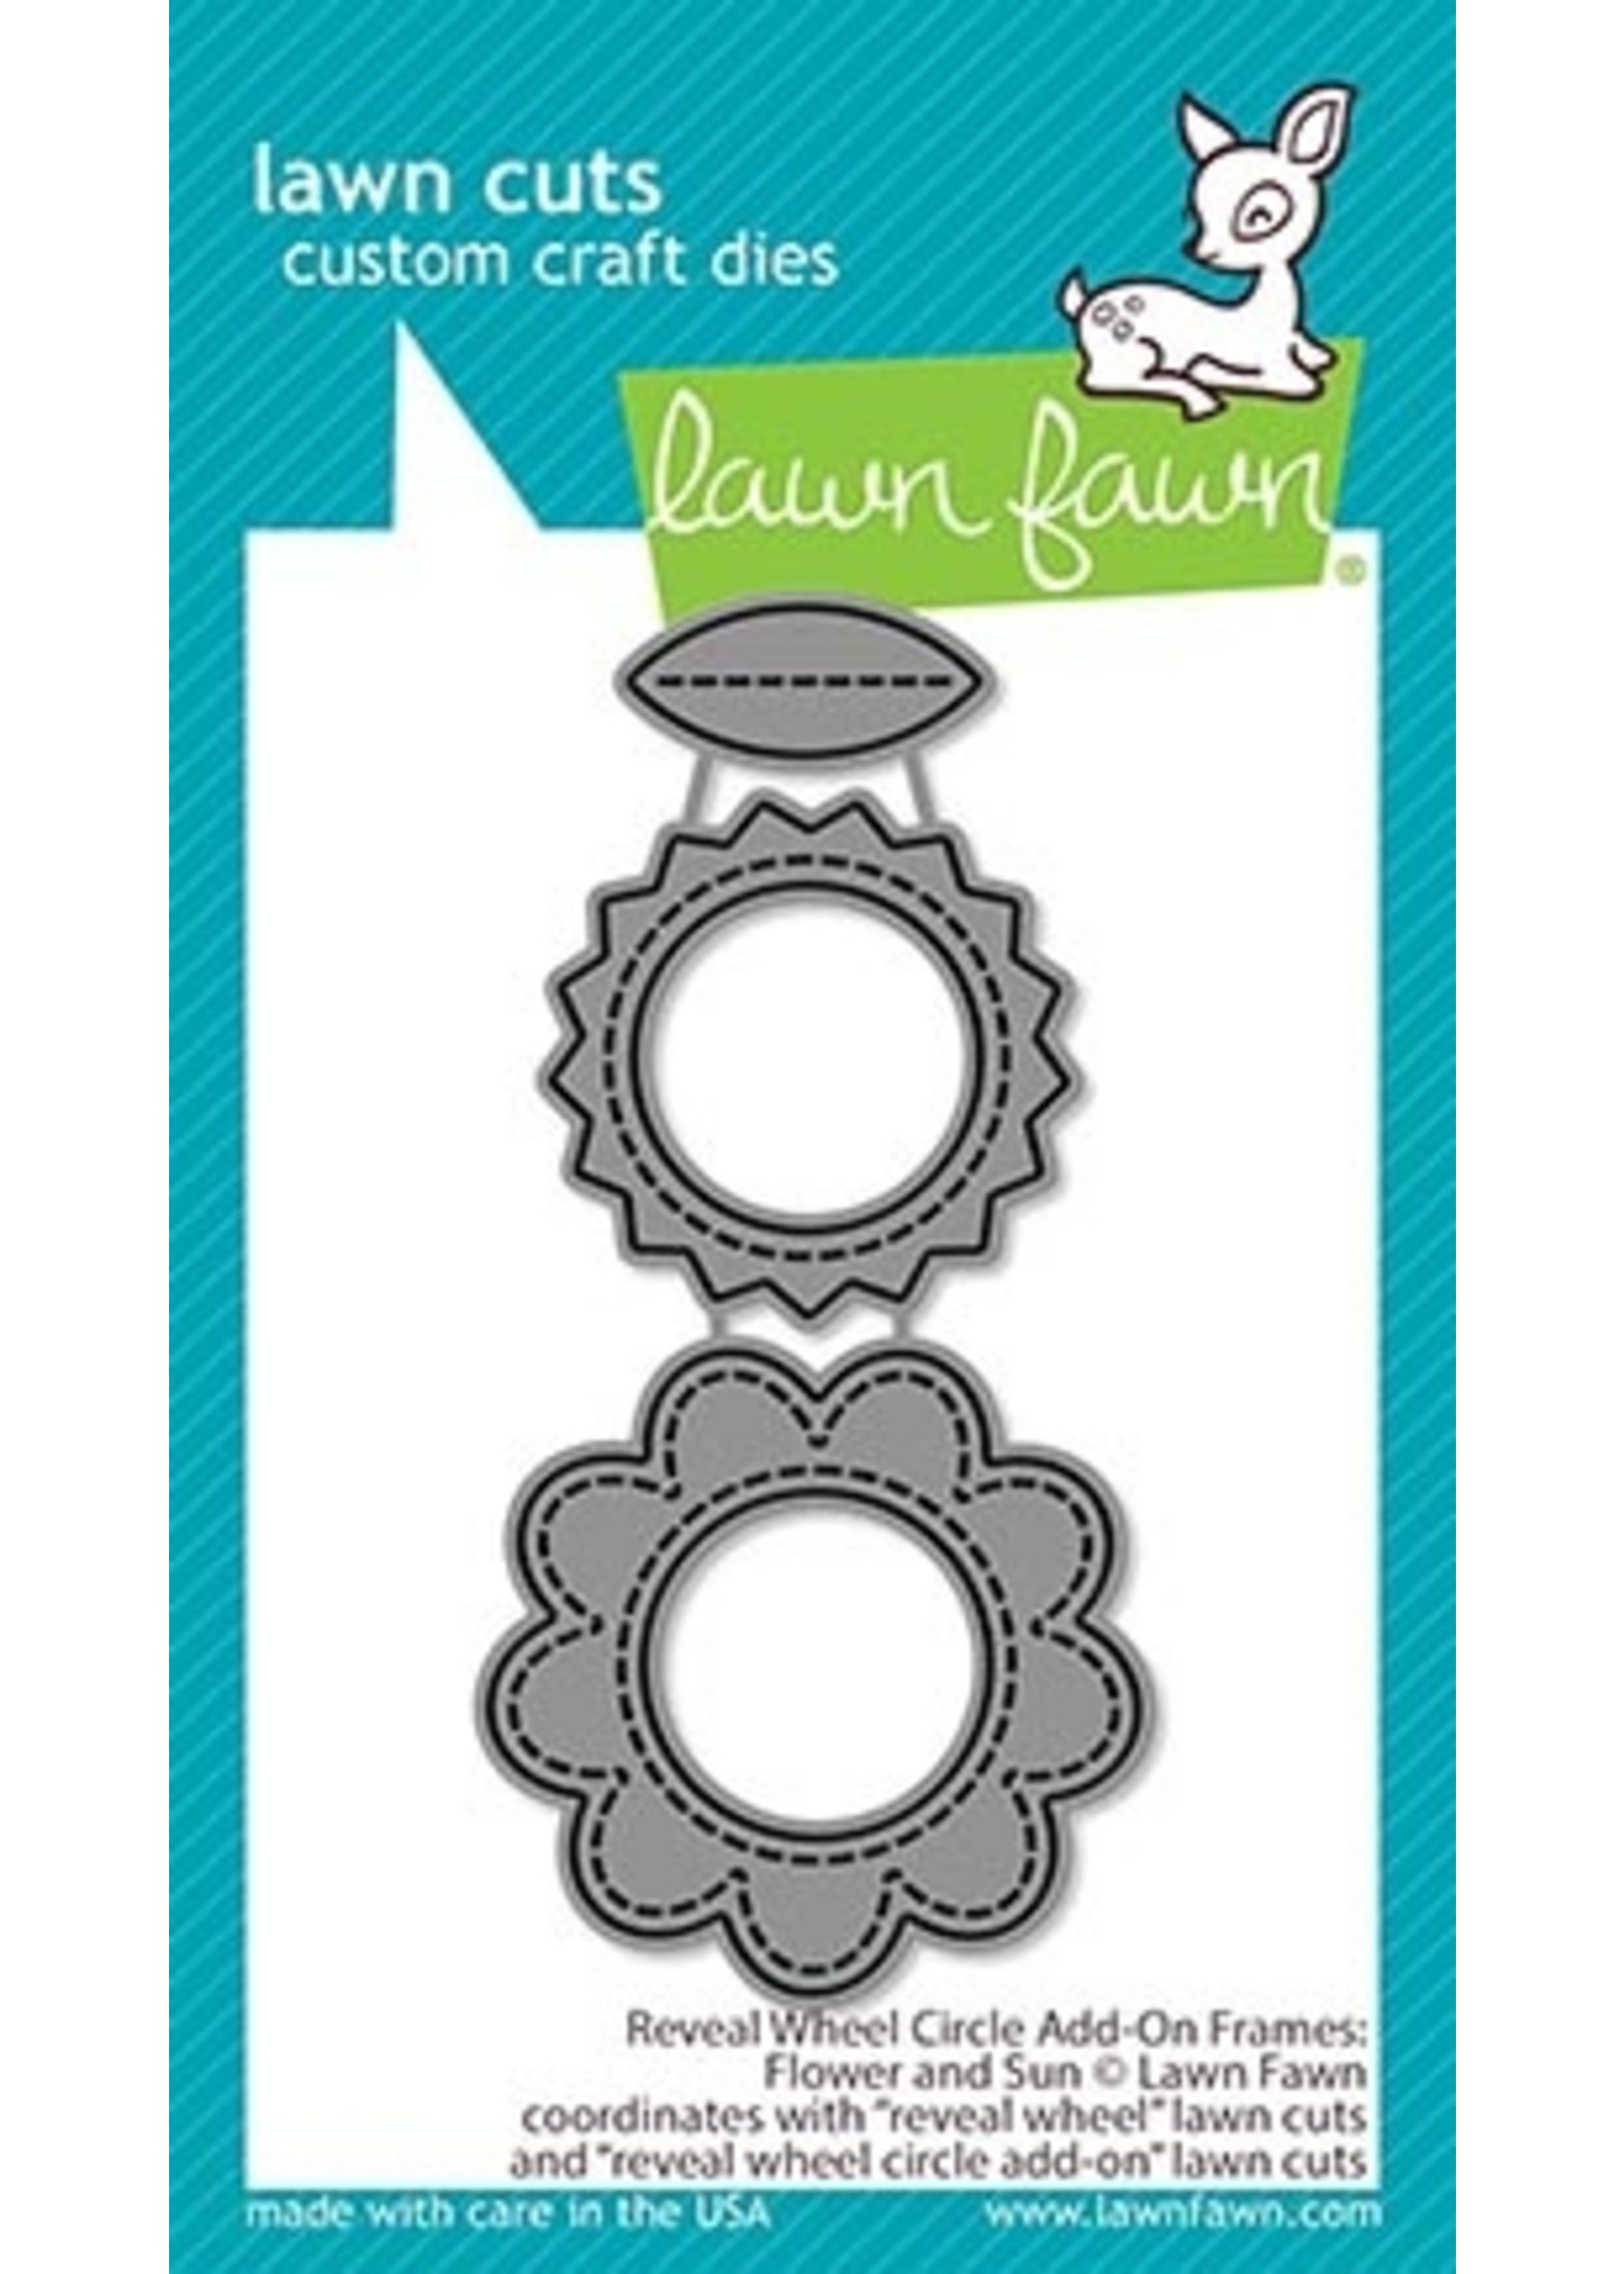 Lawn Fawn Reveal Wheel Circle Add-On Frames: Flower and Sun